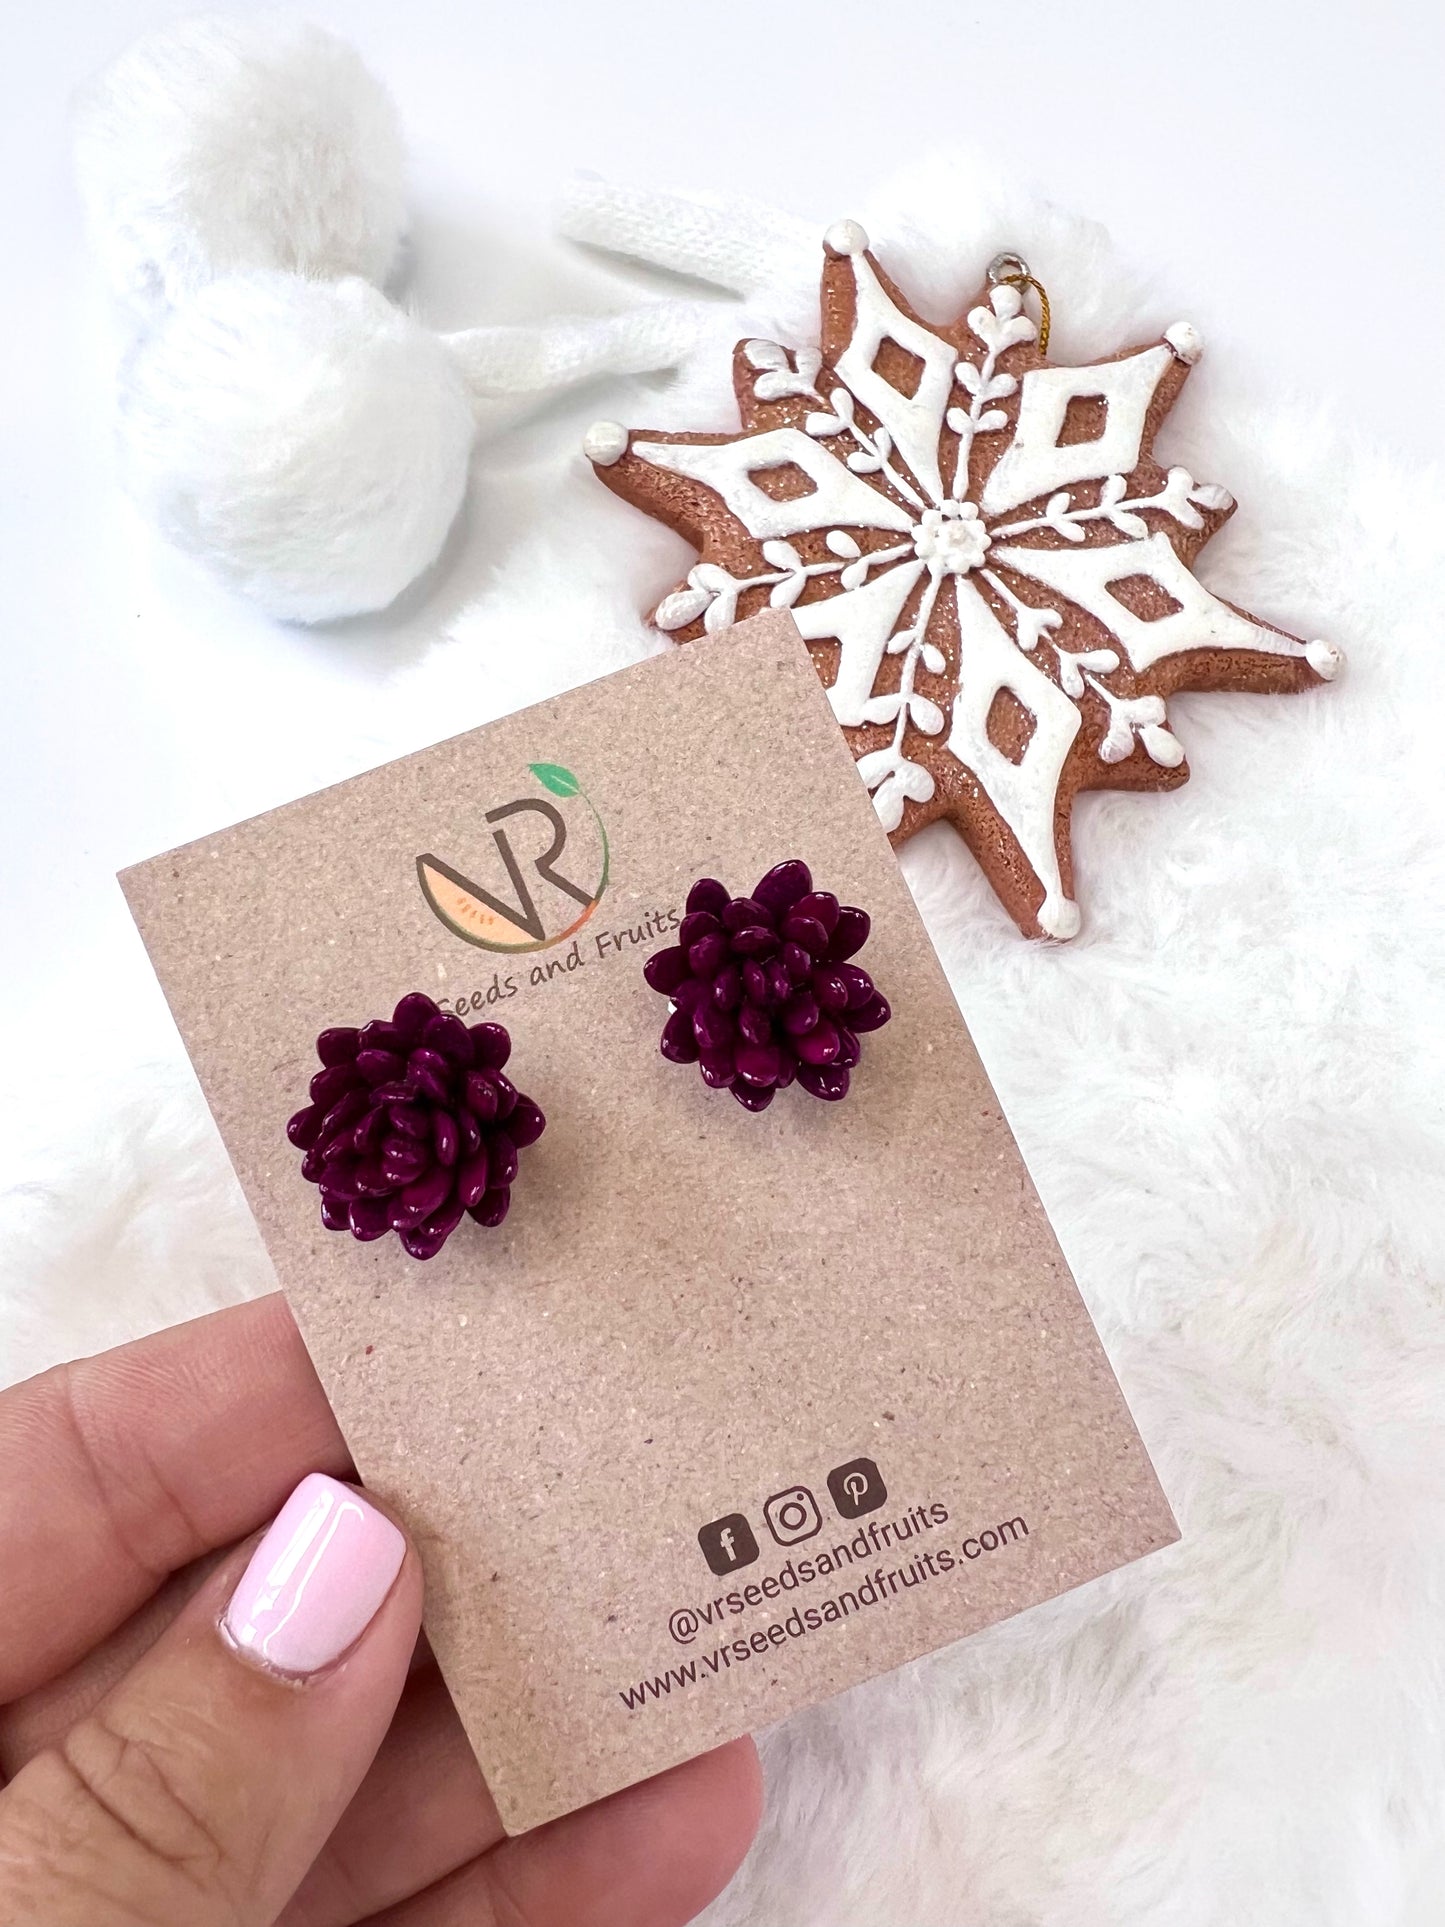 TUTTI FRUTTI EARRINGS | VR Seeds and Fruits 